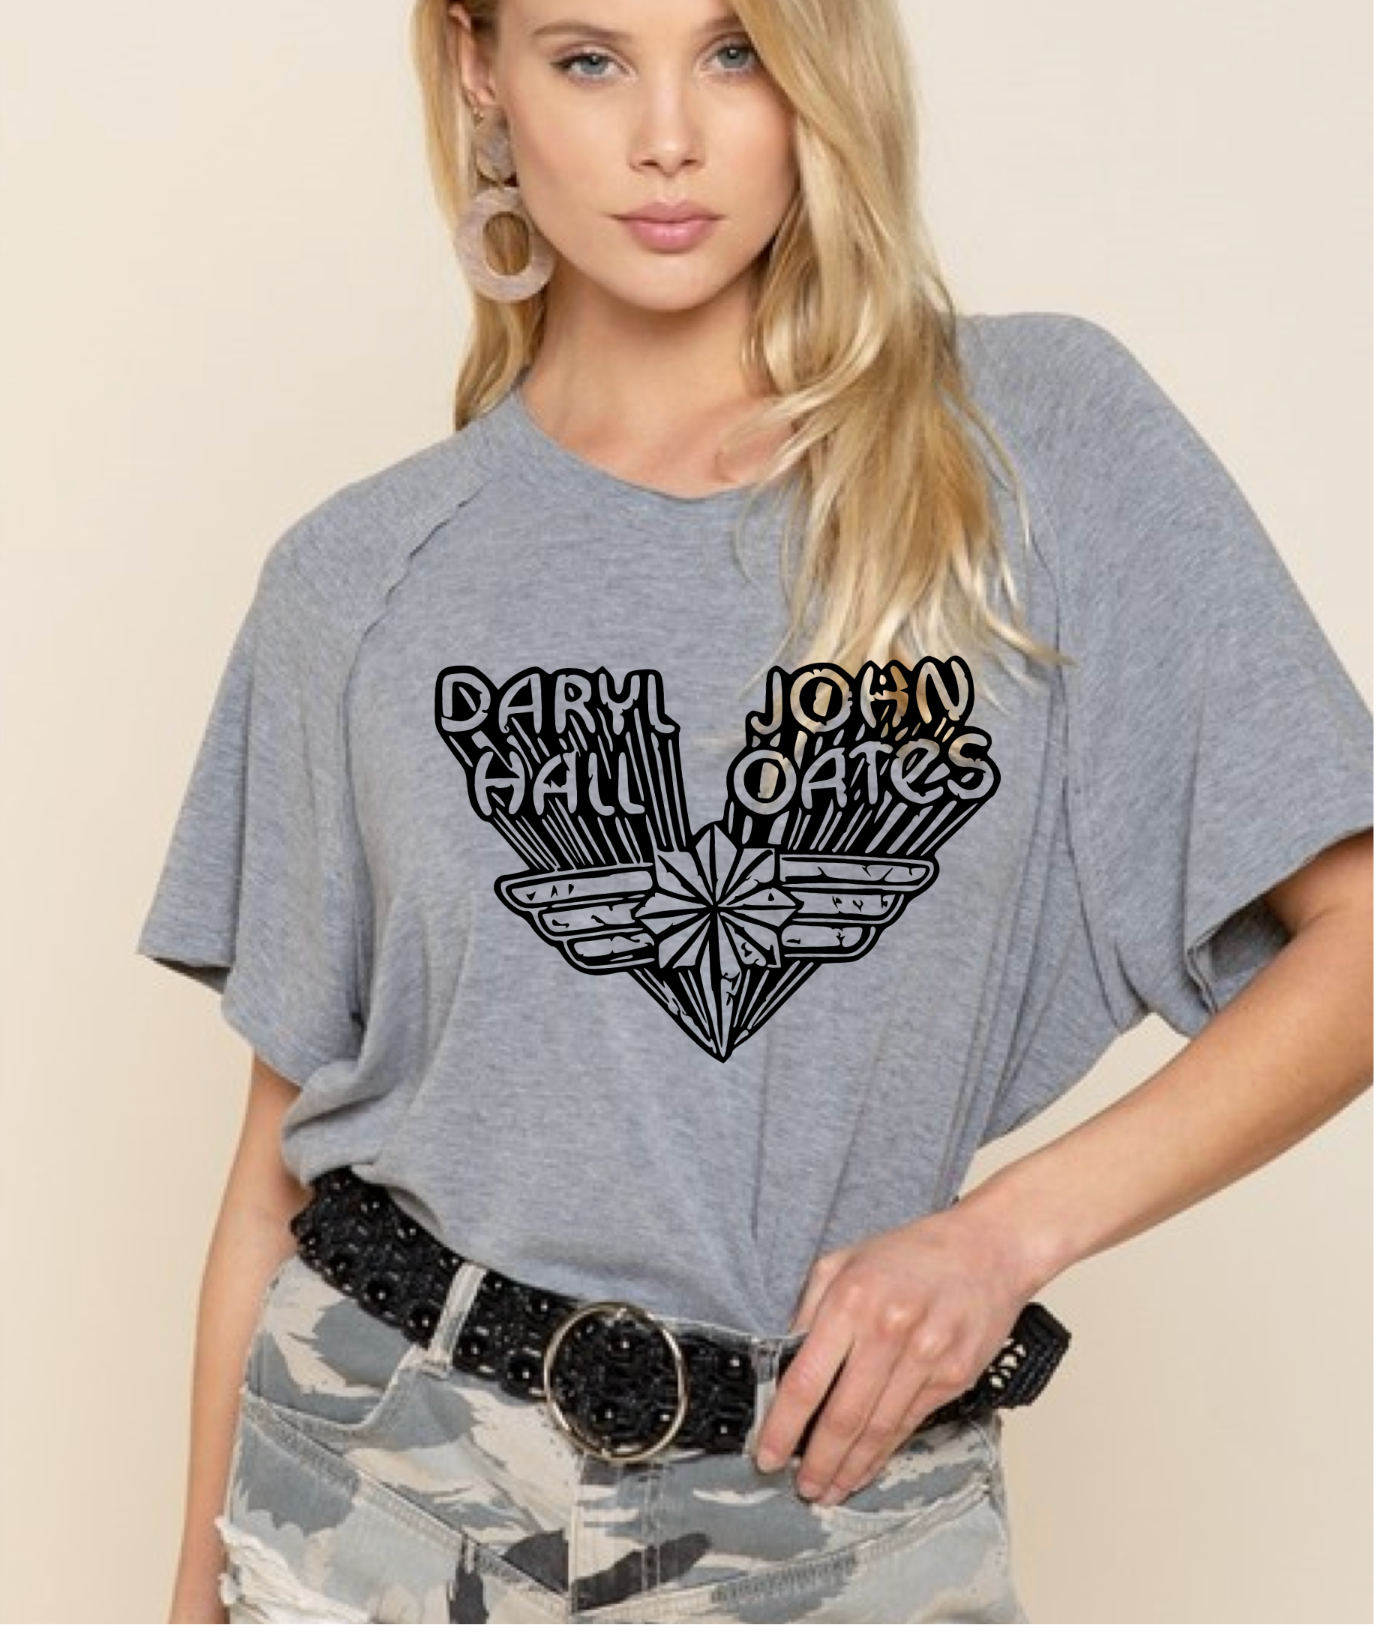 HALL N OATES GRAY OVERSIZE GRAPHIC COMFY TSHIRT